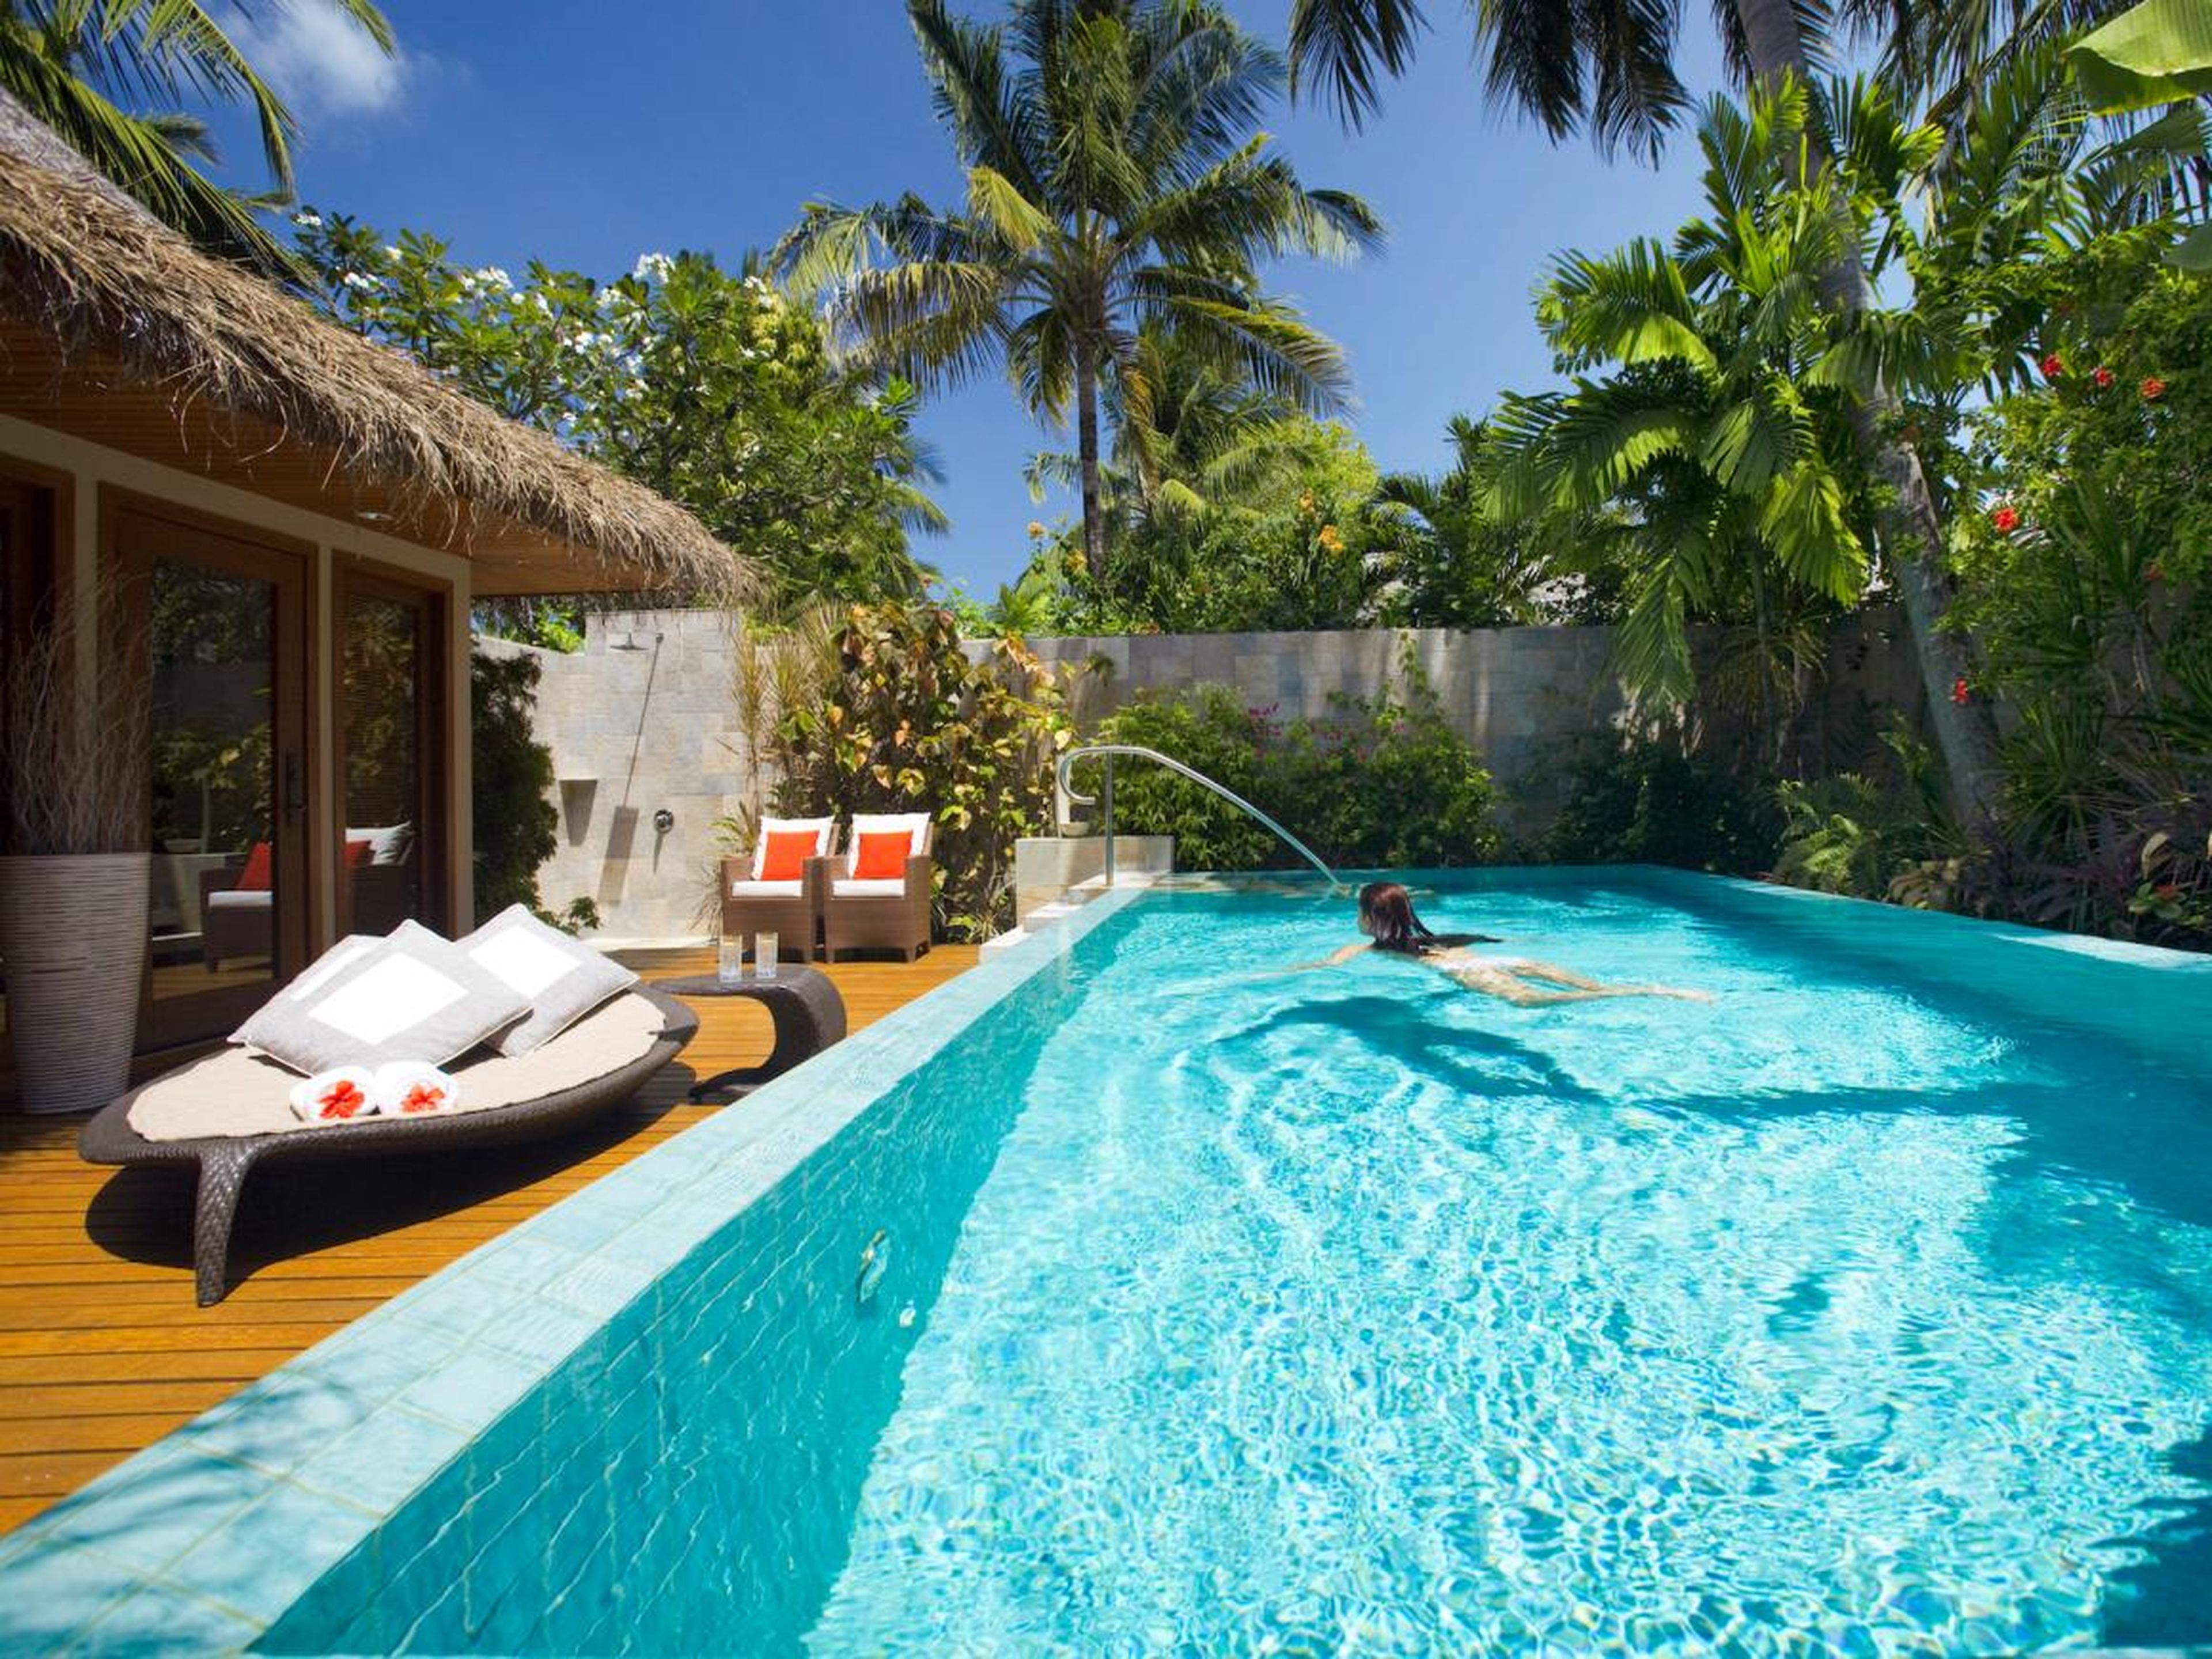 And it comes with its own private infinity pool. Rates for the Baros Residence can go up to $3,264 per night.